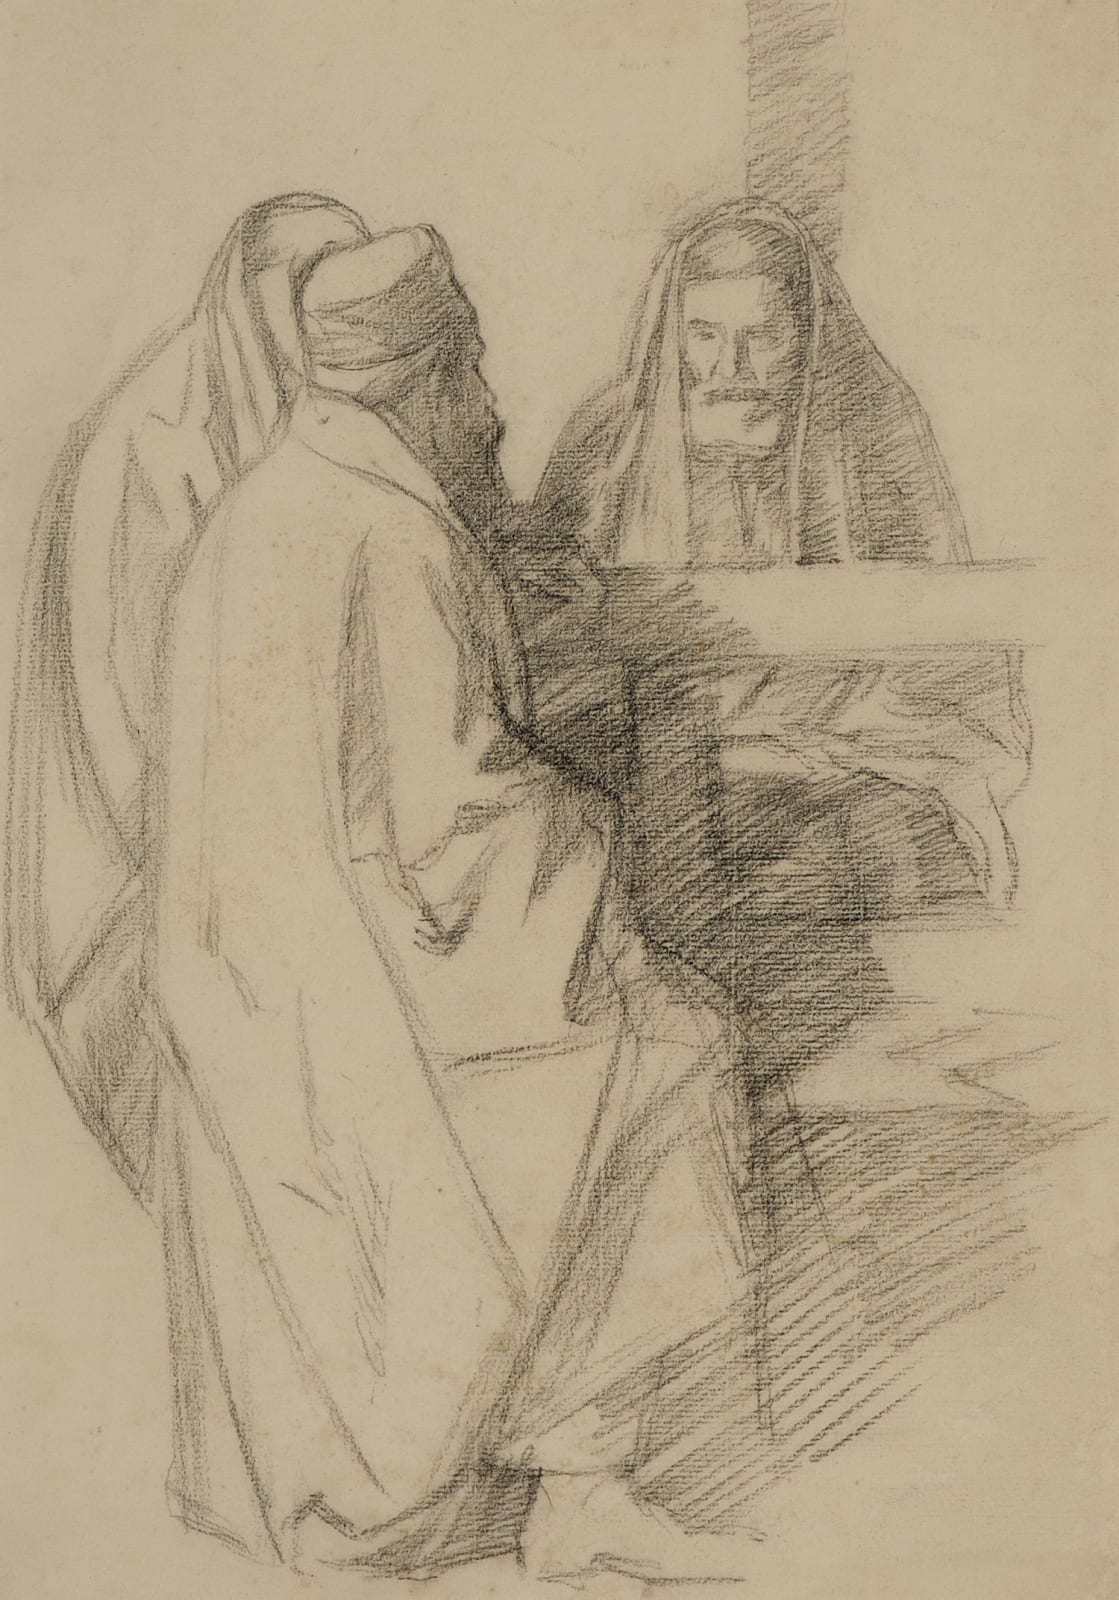 William Rothenstein (1872-1945) Talmudic Discussion c.1905 Pencil on paper 37 x 25.5 cm Ben Uri Collection To see and discover more about this artist click here